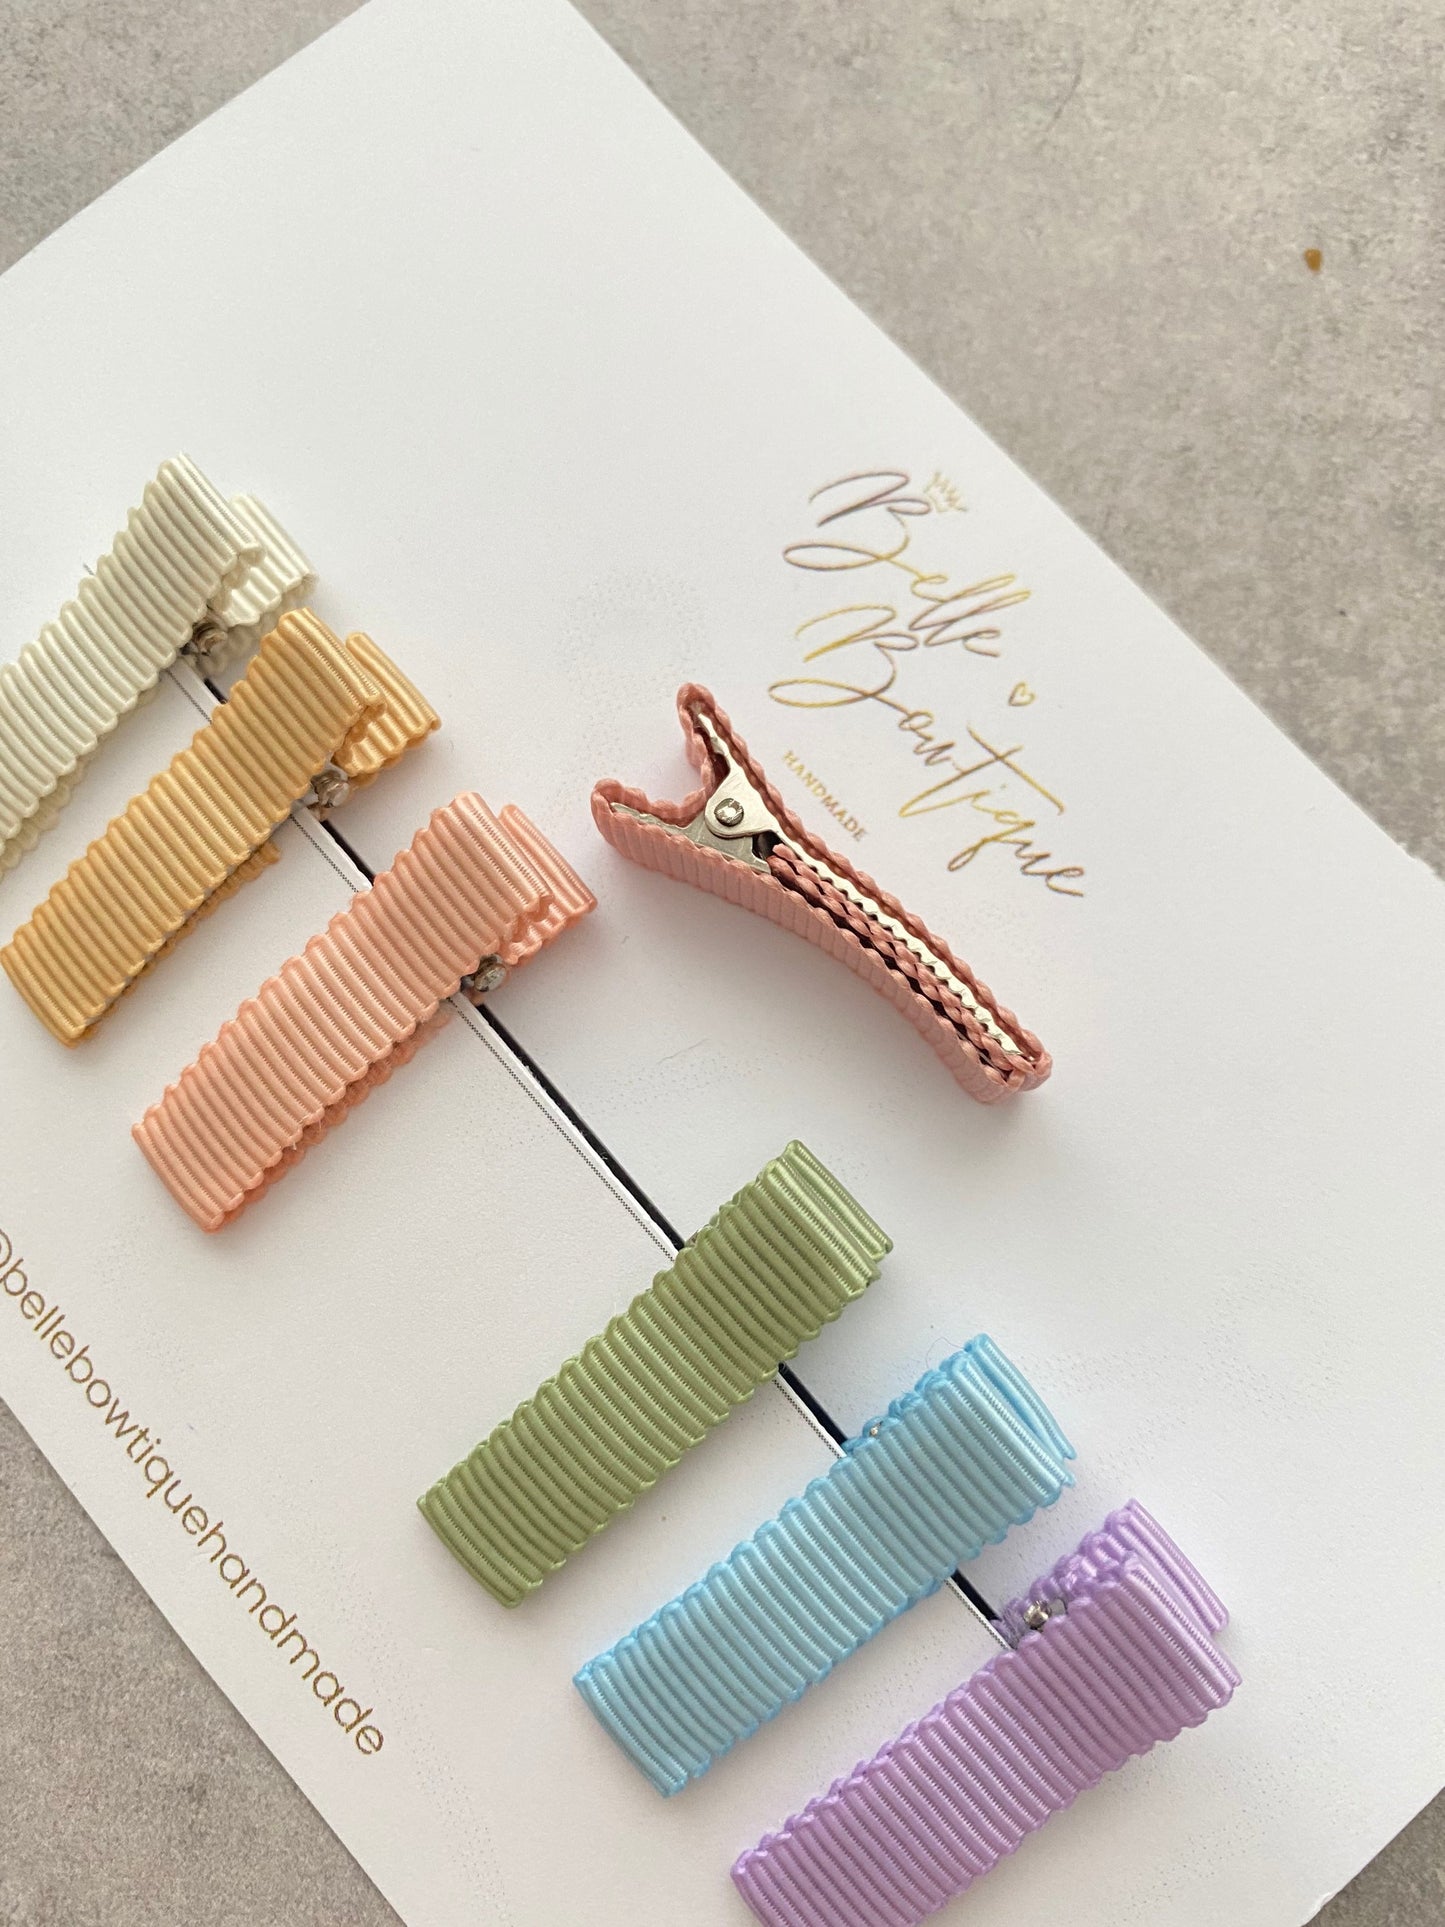 Fully Lined Ribbon Fringe Clips Pack of 7 - Small Clips - Mini Clips - Clip Pack - Baby Hair Clips - Toddler Hair Clips